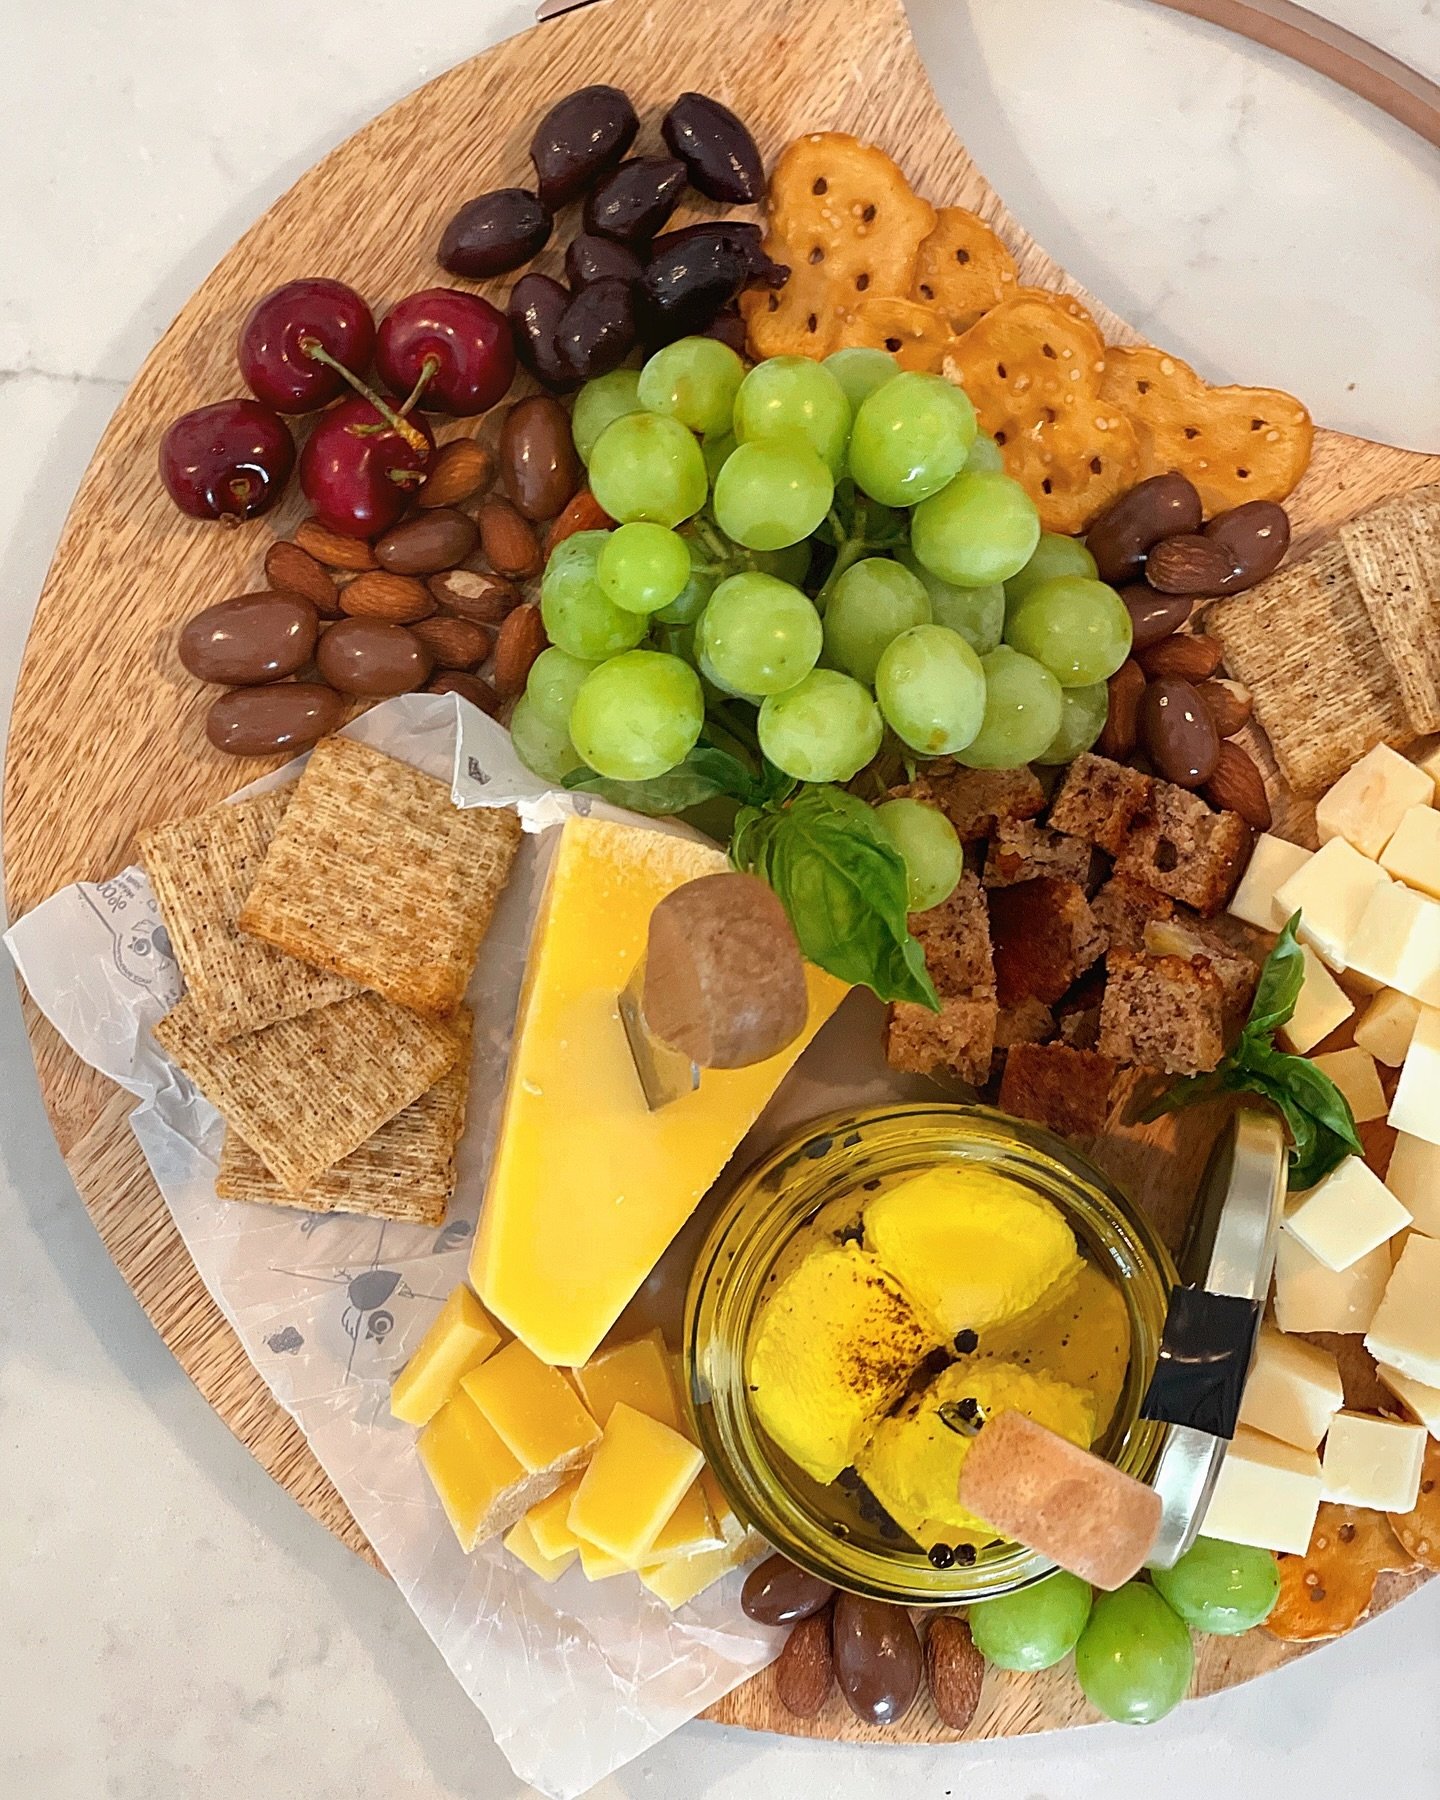 I know it's only 11 AM but thinking ahead, Thursday night wine and cheese sounds so perfect right now. 

One of my favorite cheeseboard experiences is building one at a friend's house. I raid their fridges and pantries and come up with something diff